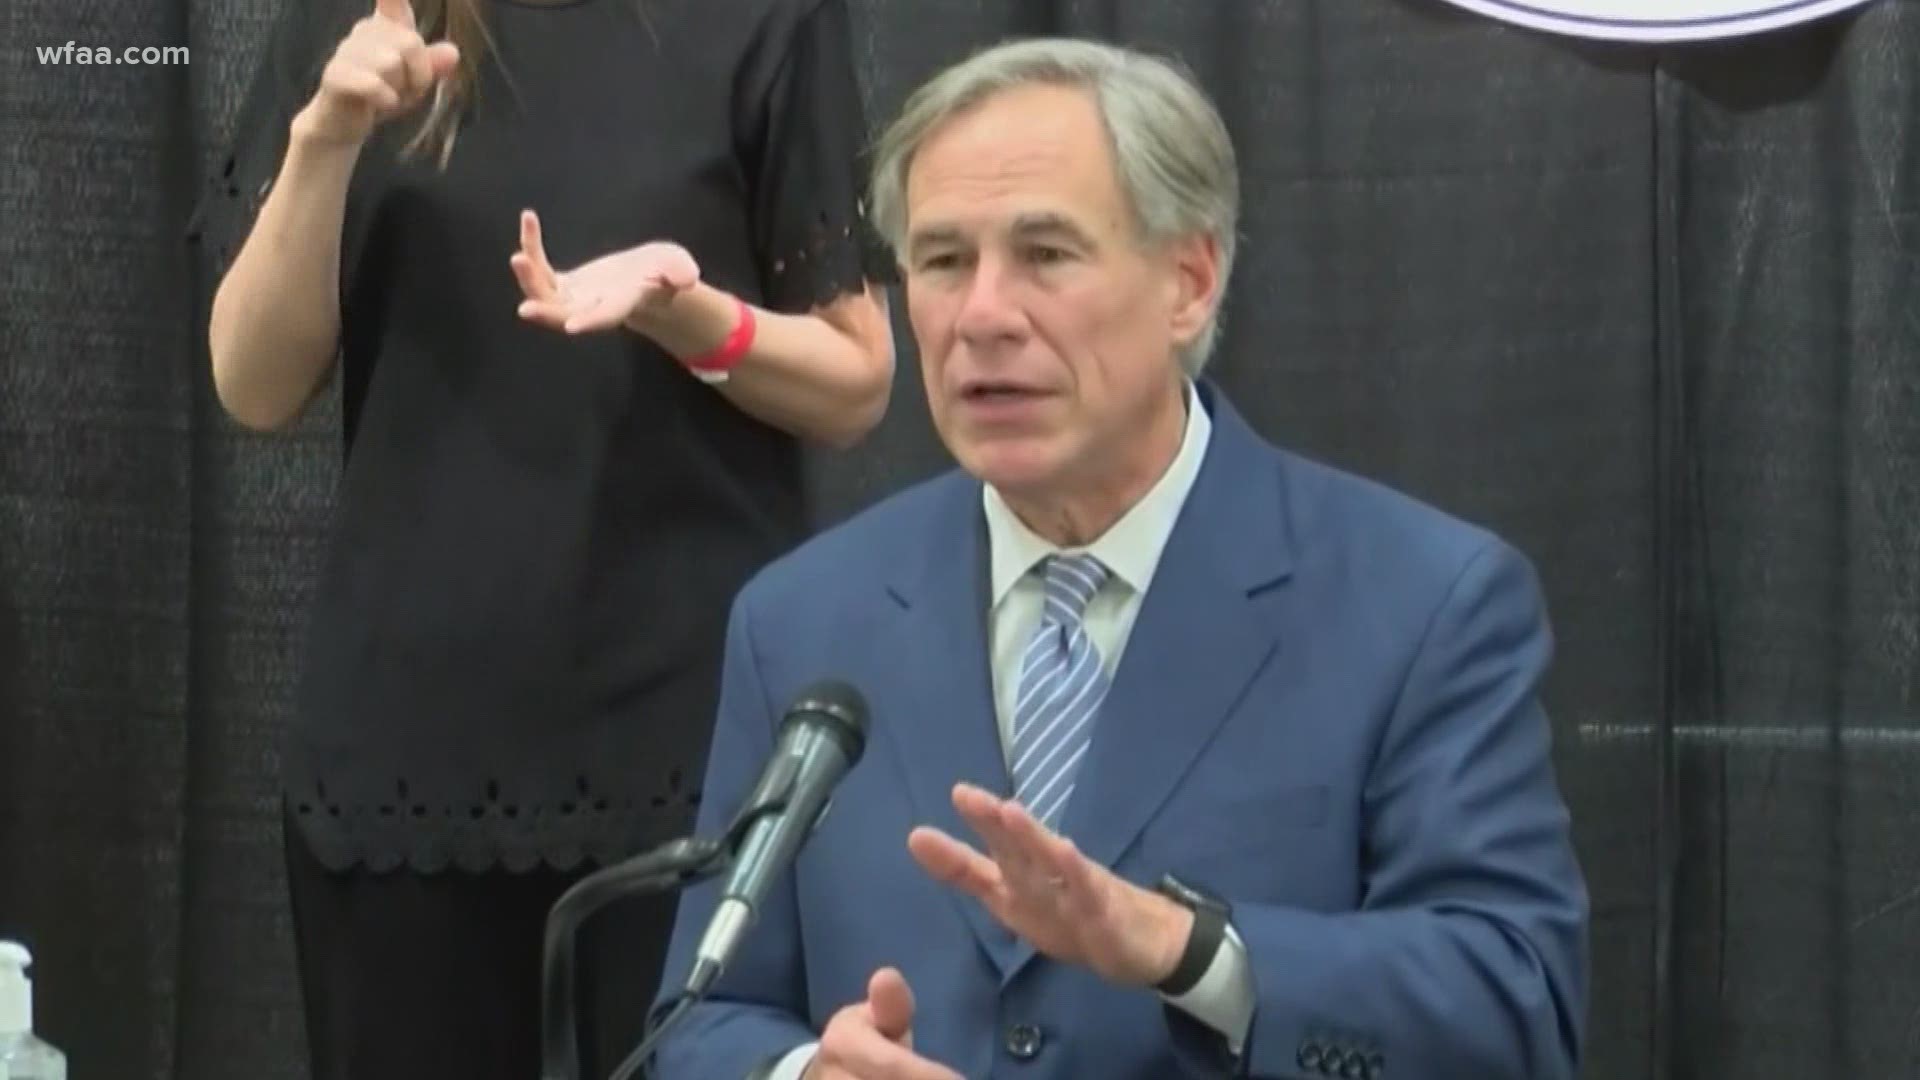 No state shutdown is coming. The Texas governor encouraged Texans to double-down on health and safety protocols.